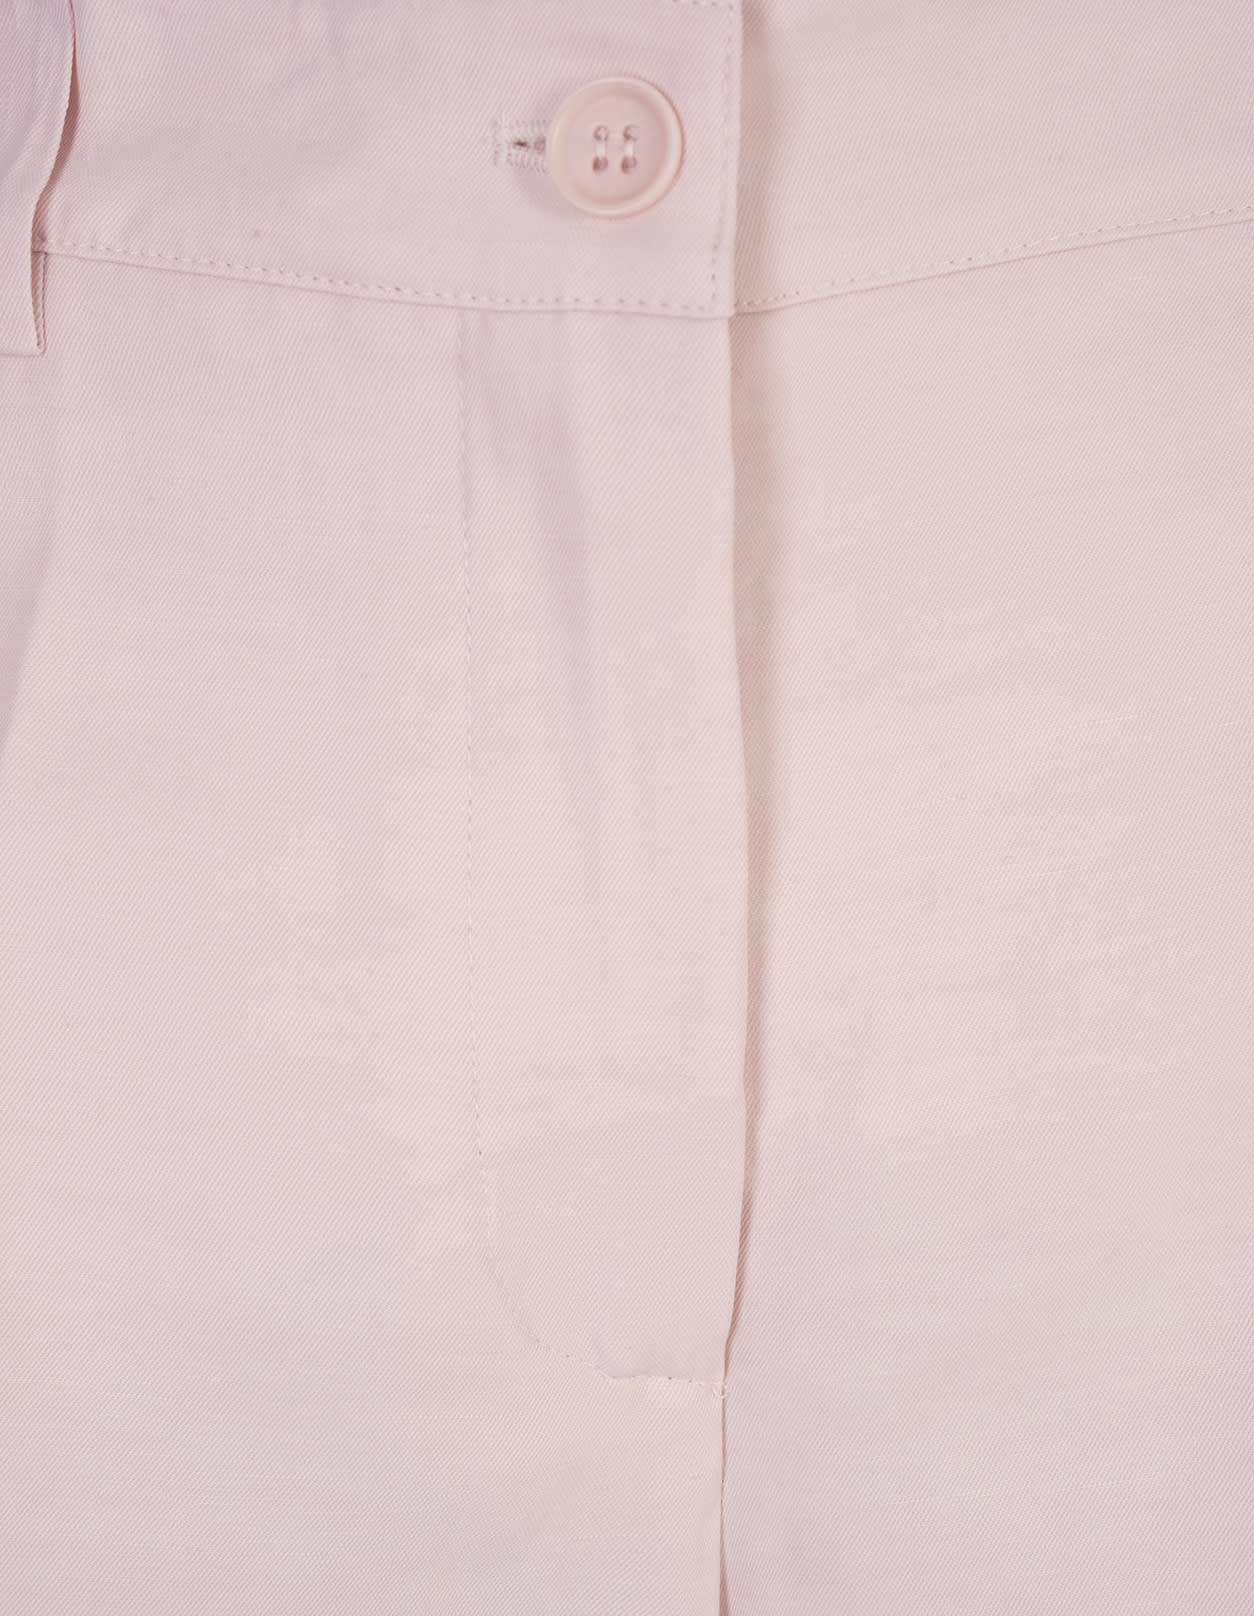 Shop P.a.r.o.s.h Pink Palazzo Trousers